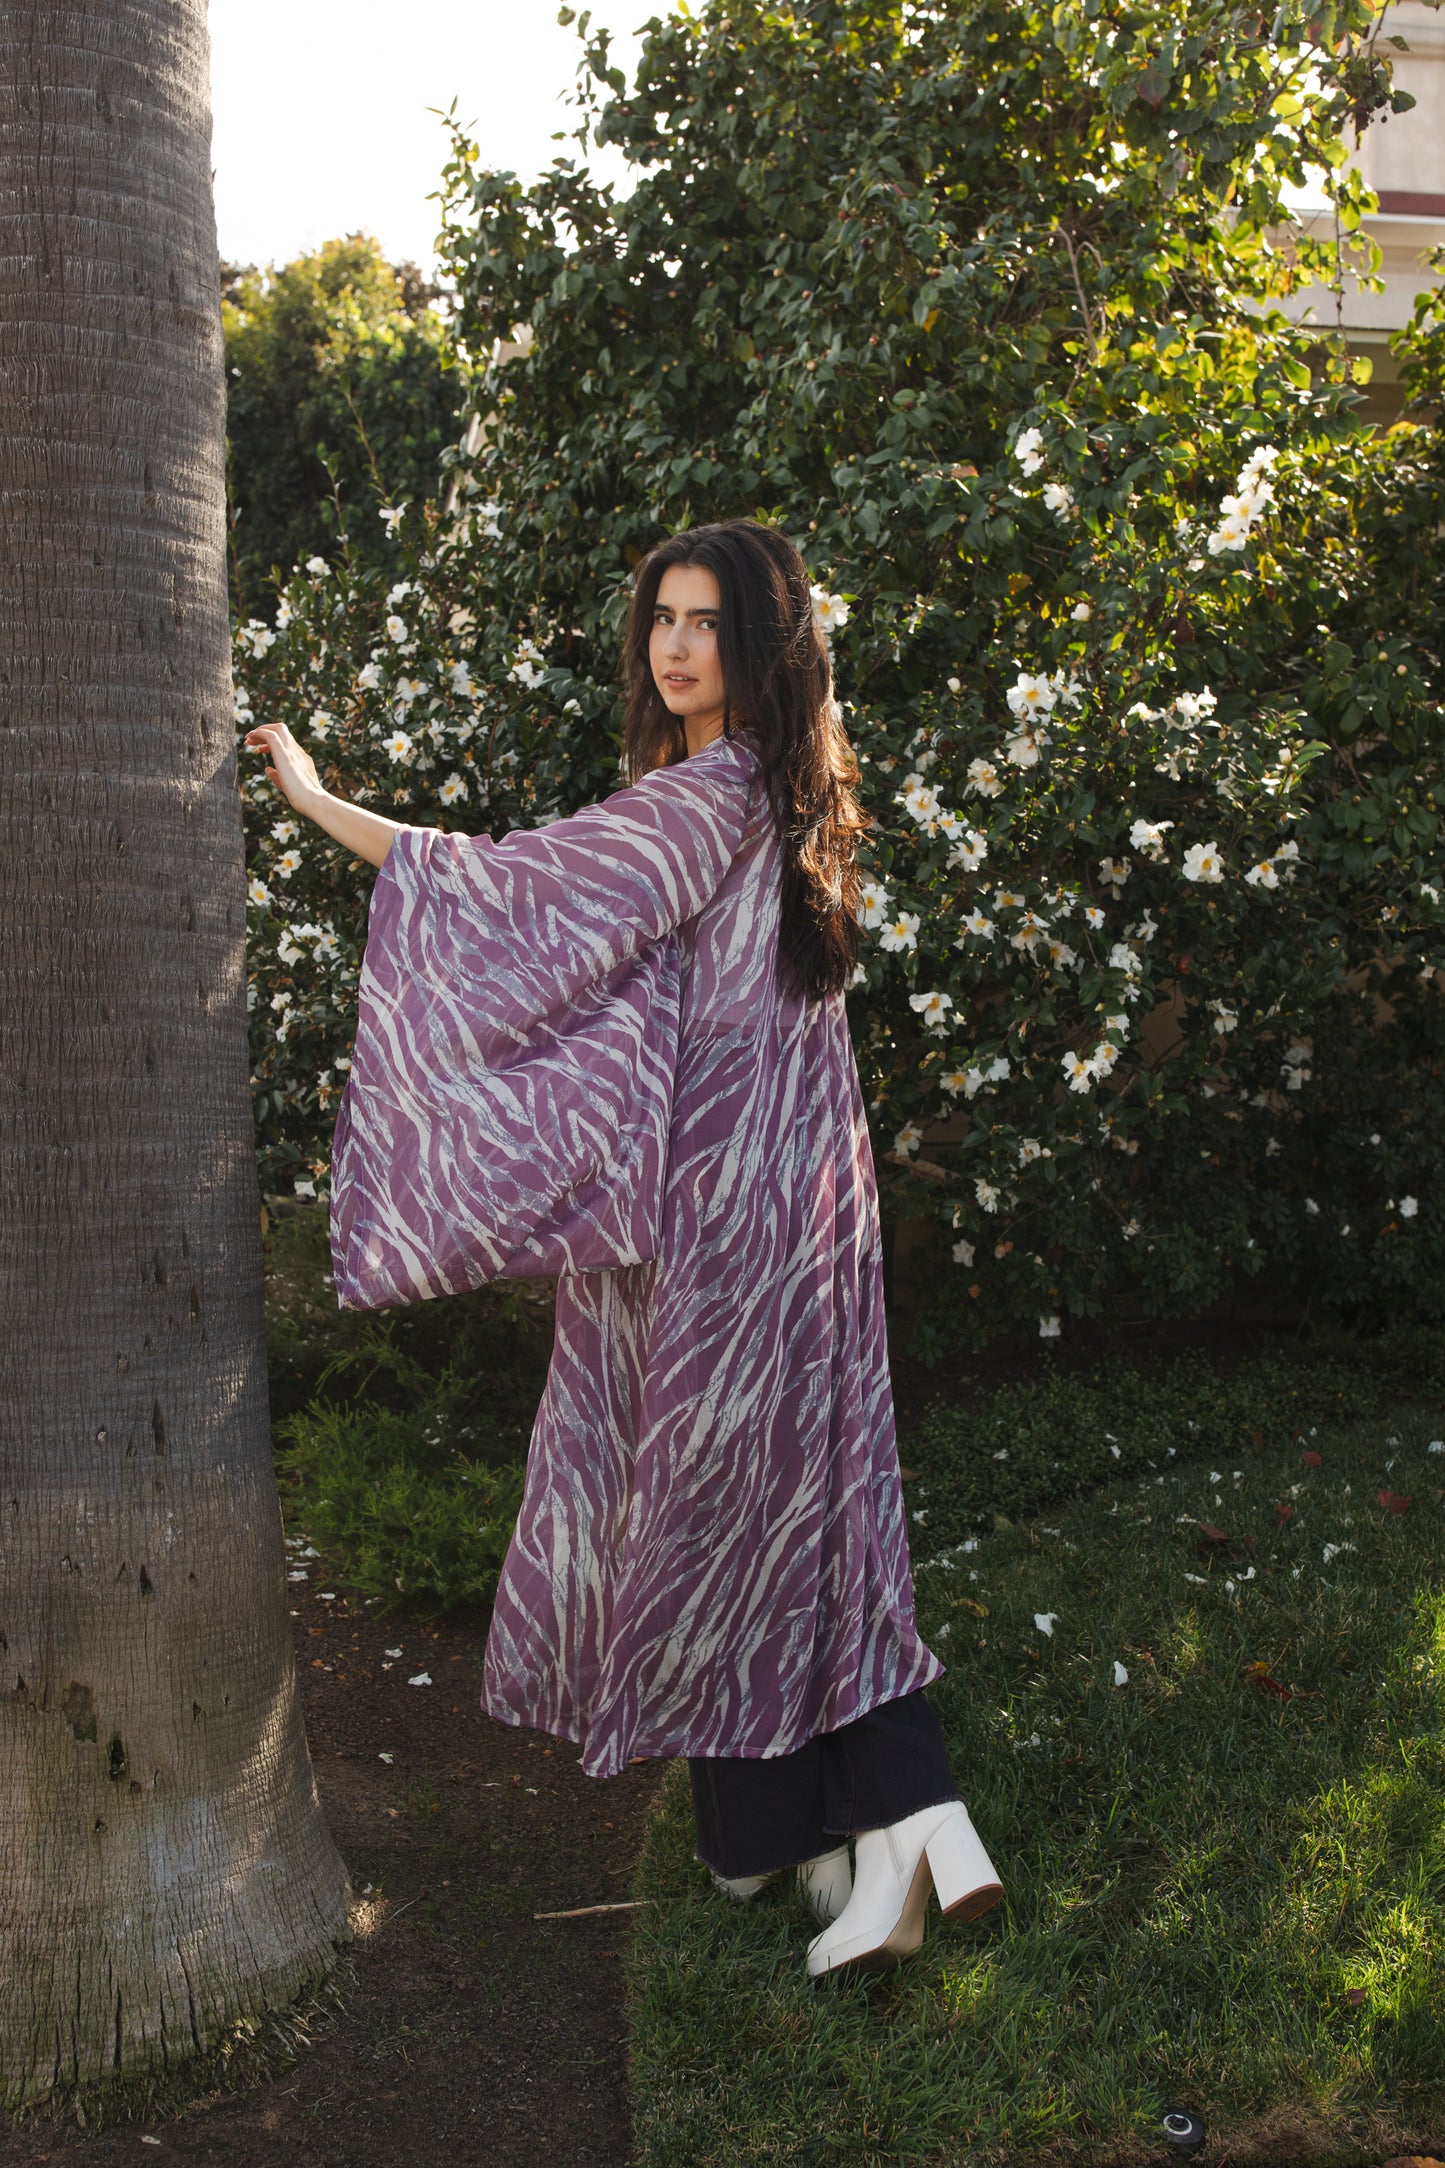 Mauve purple zebra print kimono with belt. Can be worn open as a robe or wrap dress. Long flowy sleeves with ankle hem. Made from semi sheer rayon chiffon fabric.